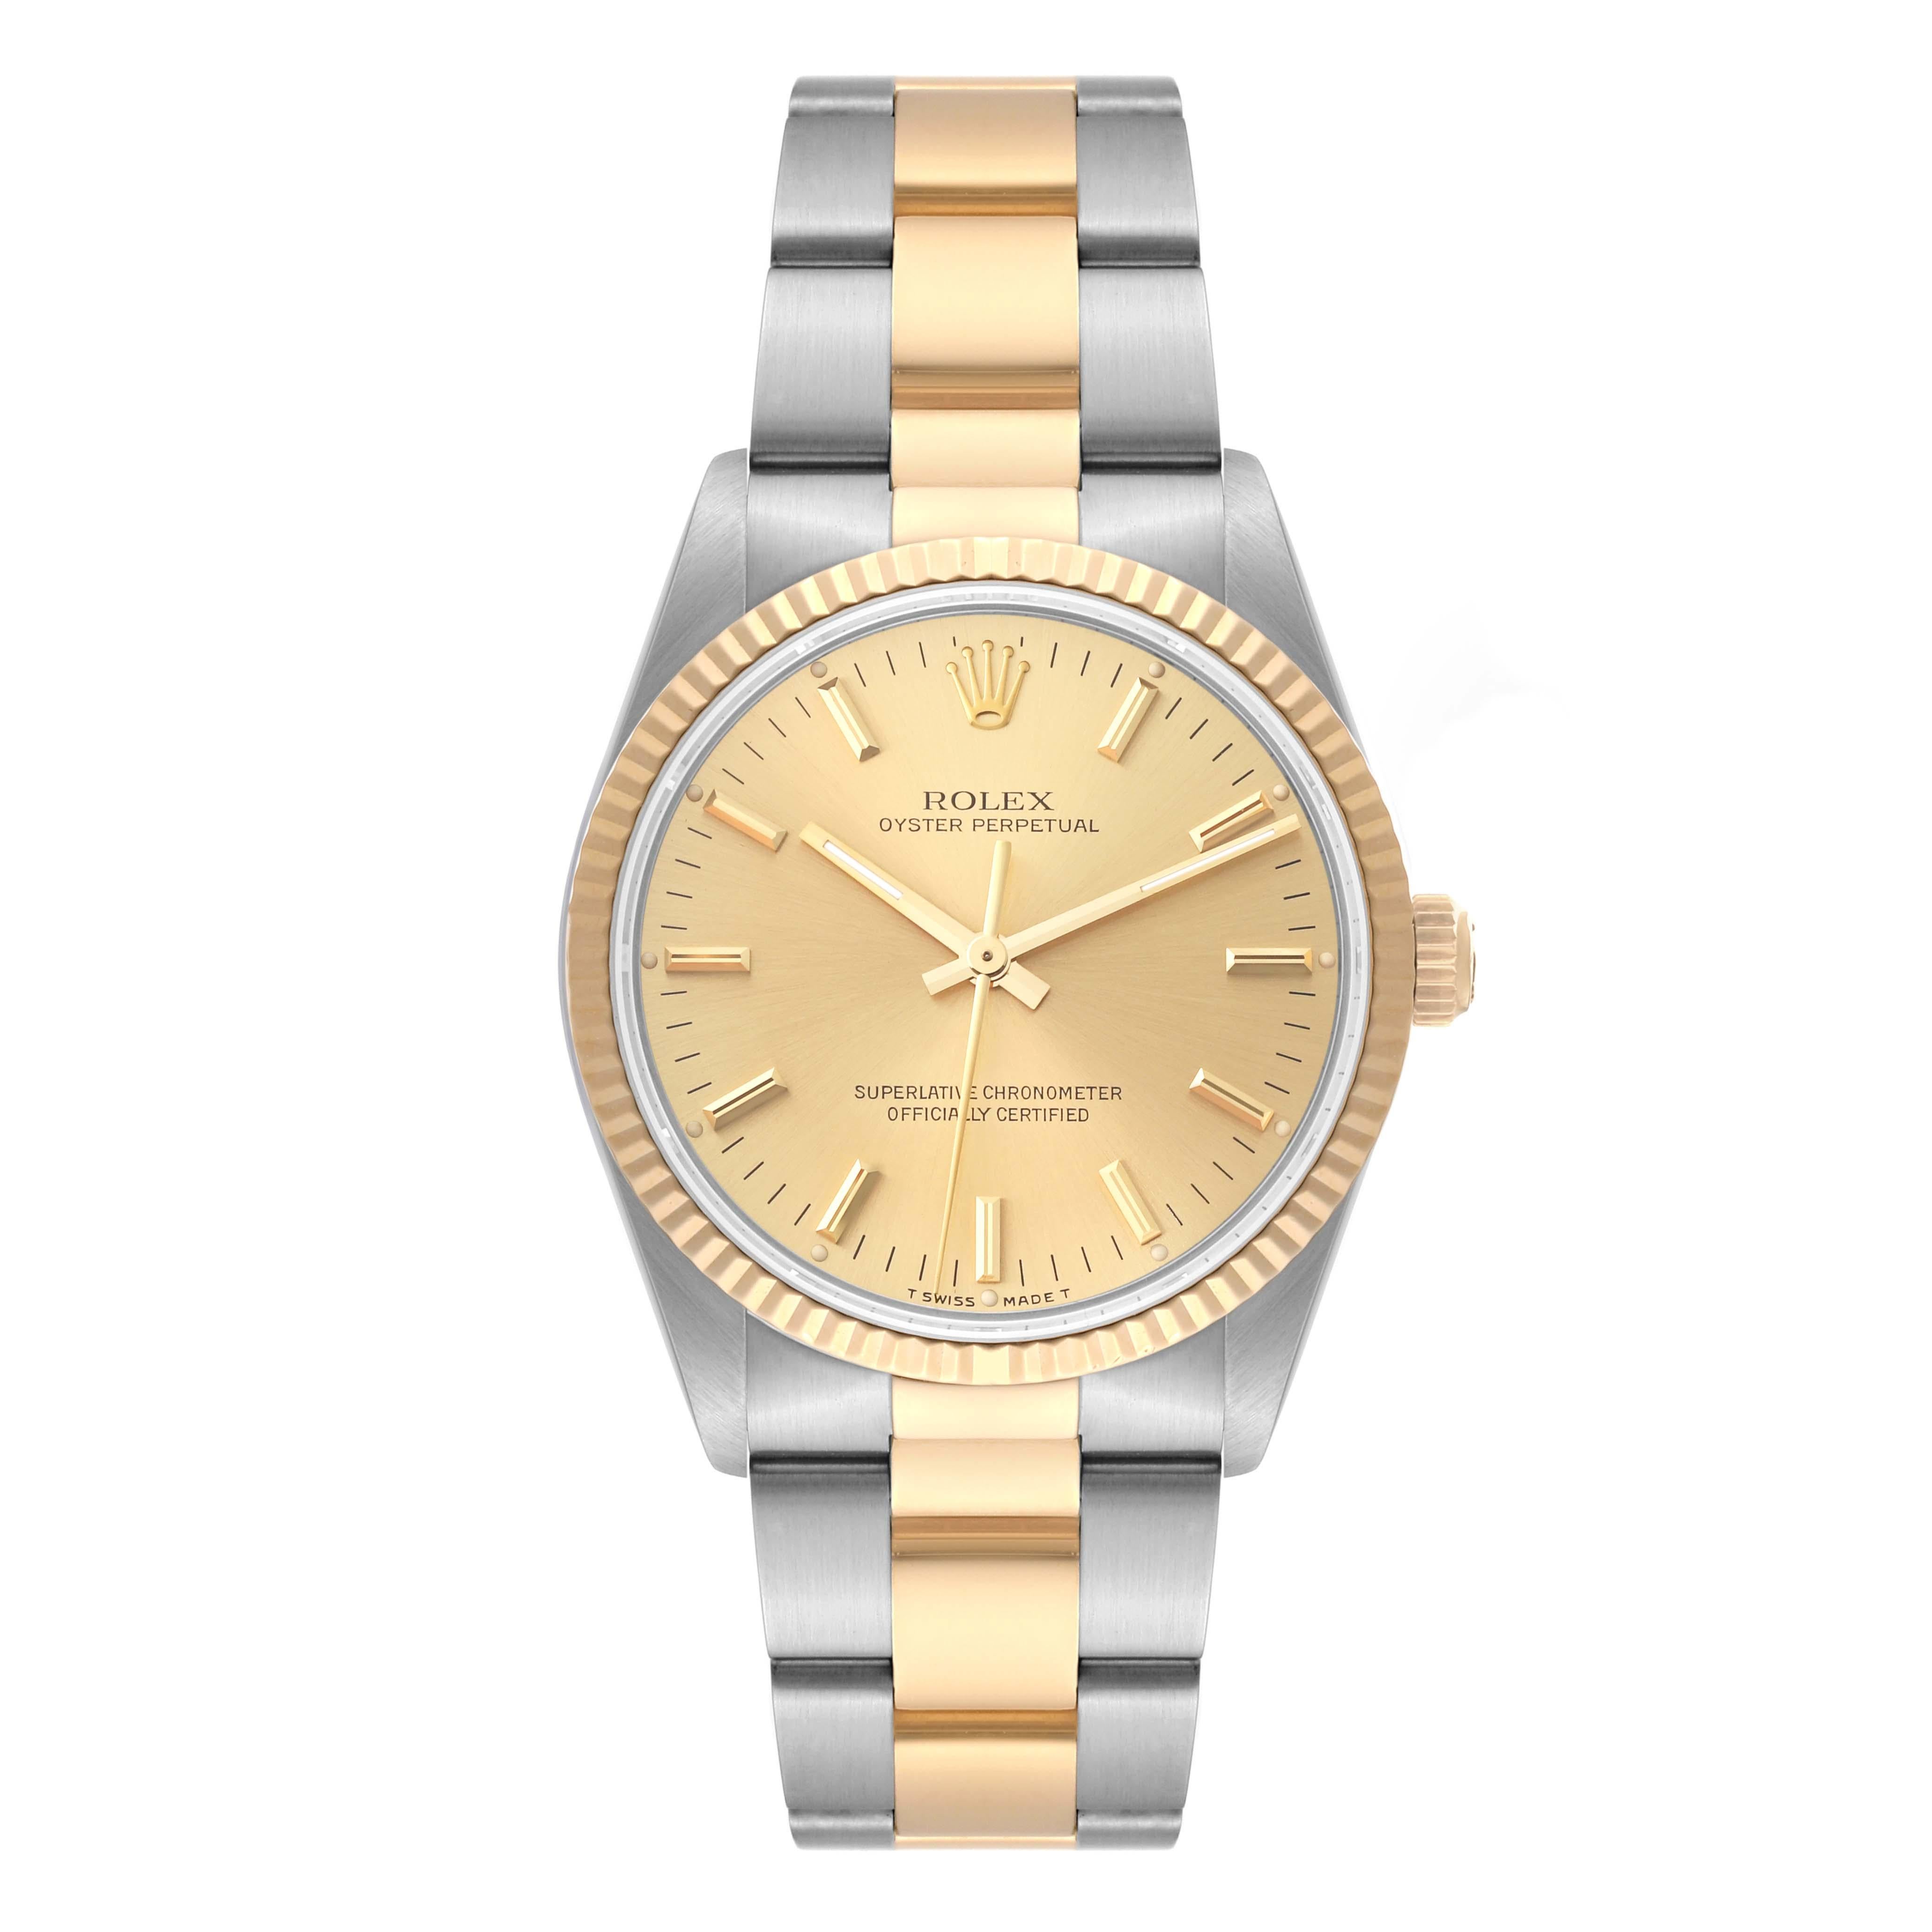 Rolex Oyster Perpetual Fluted Bezel Steel Yellow Gold Mens Watch 14233. Officially certified chronometer automatic self-winding movement. Stainless steel and 18K yellow gold oyster case 34.0 mm in diameter. Rolex logo on the crown. 18K yellow gold